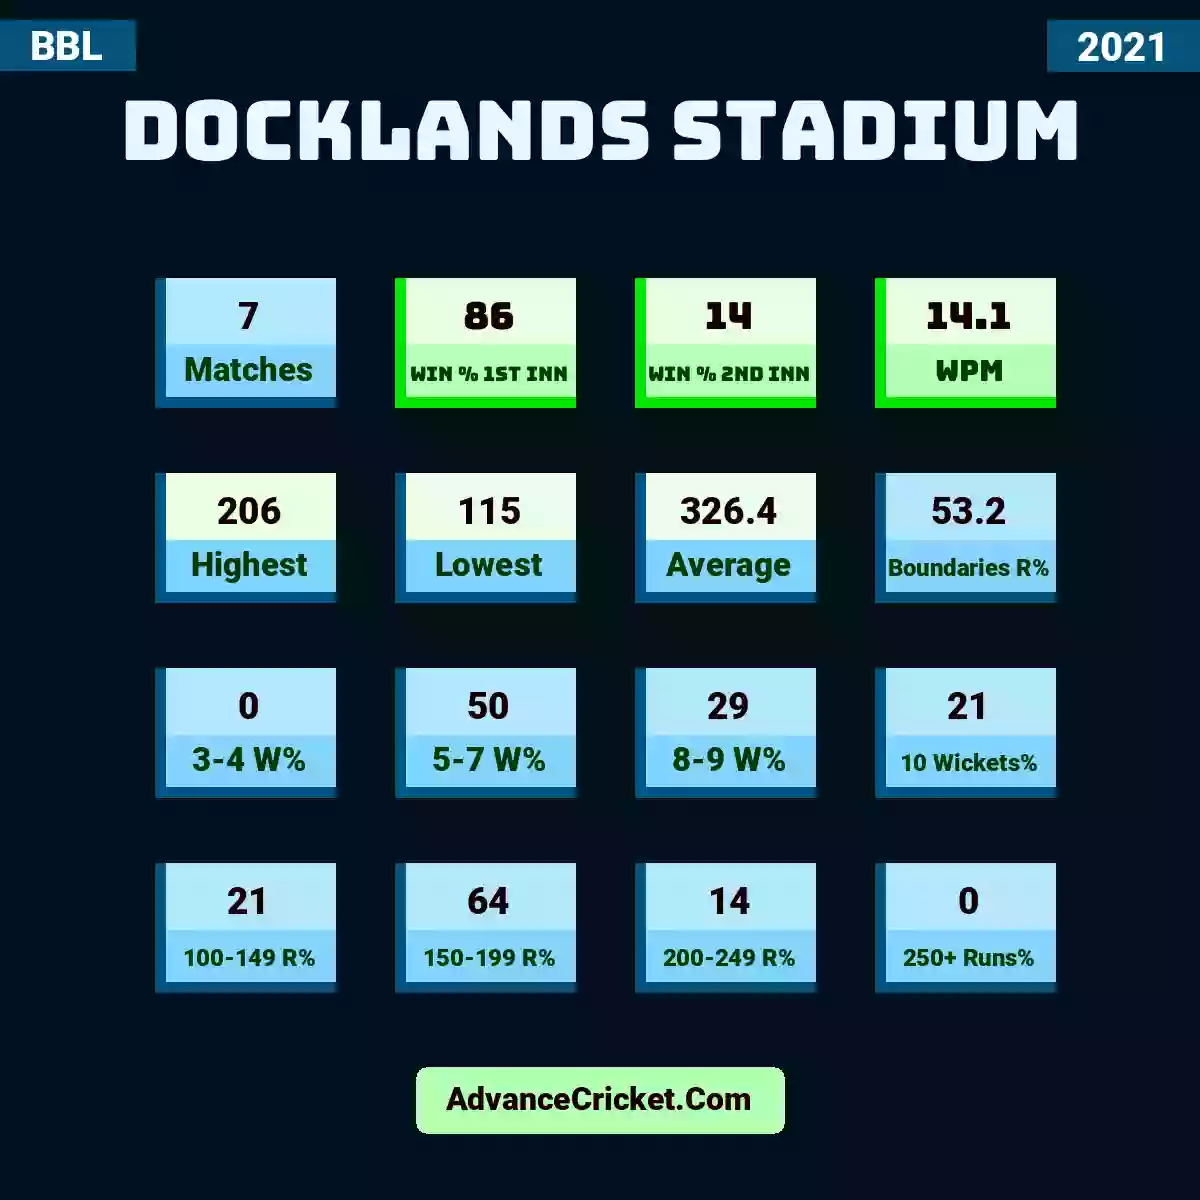 Image showing Docklands Stadium with Matches: 7, Win % 1st Inn: 86, Win % 2nd Inn: 14, WPM: 14.1, Highest: 206, Lowest: 115, Average: 326.4, Boundaries R%: 53.2, 3-4 W%: 0, 5-7 W%: 50, 8-9 W%: 29, 10 Wickets%: 21, 100-149 R%: 21, 150-199 R%: 64, 200-249 R%: 14, 250+ Runs%: 0.